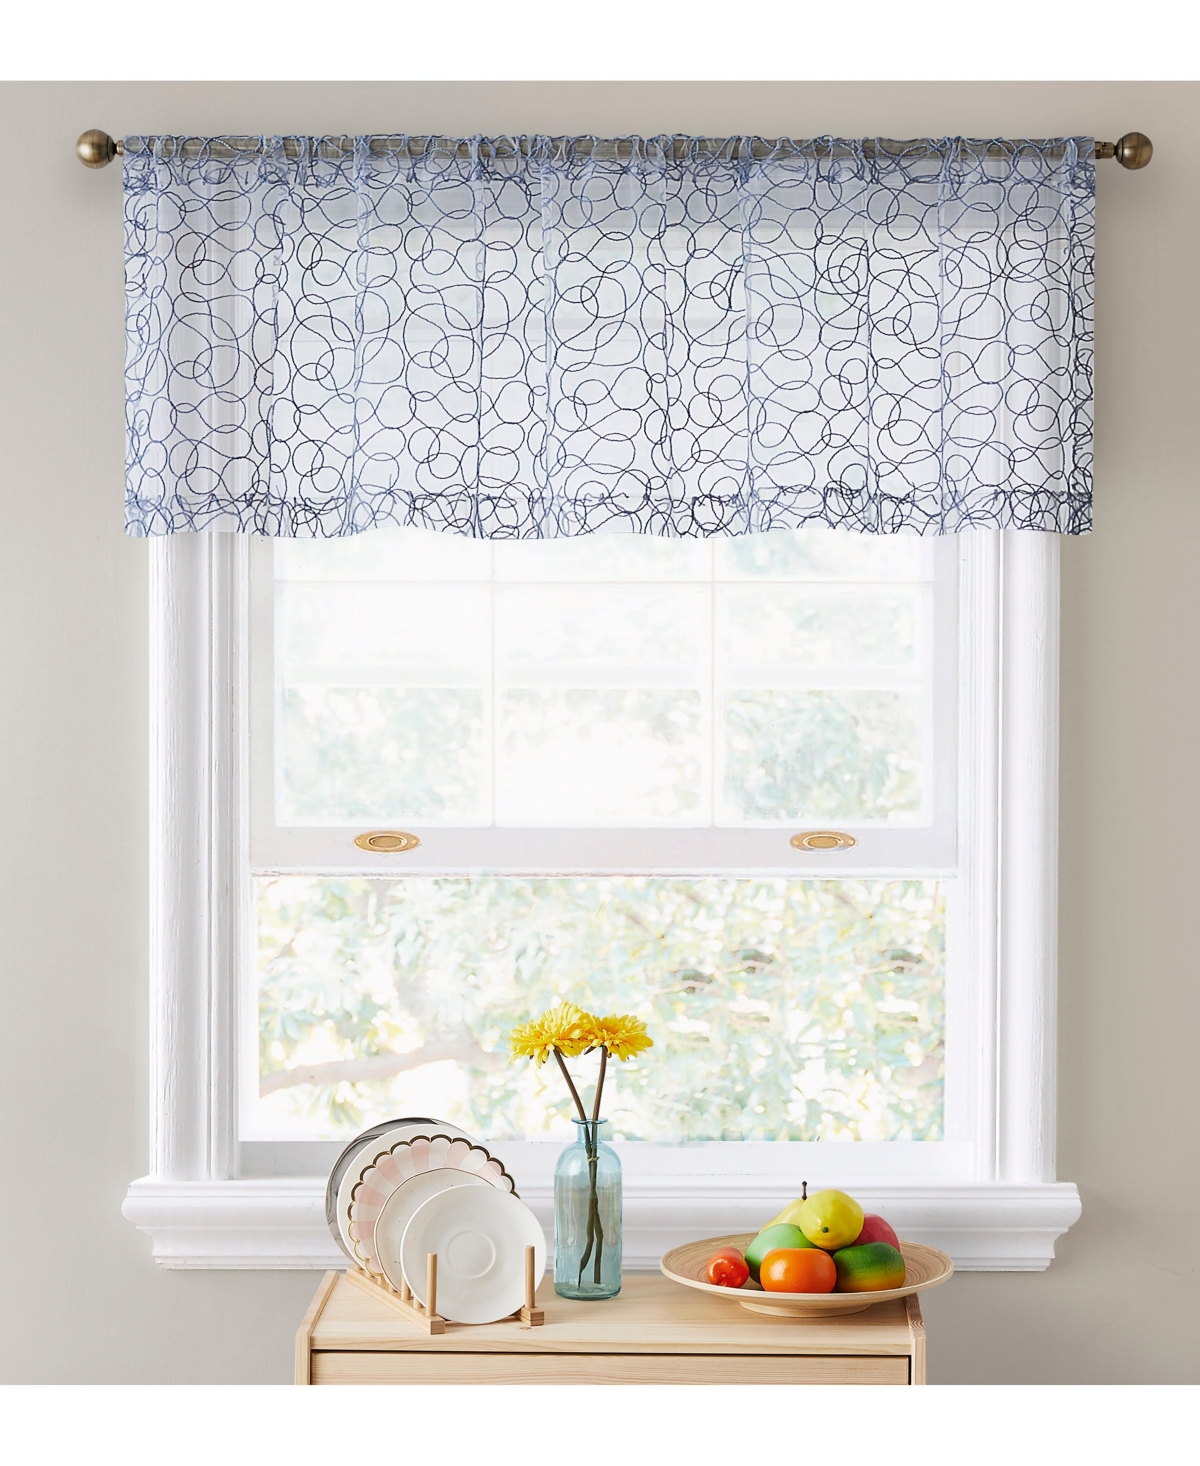 Audrey Embroidered Sheer Voile Window Curtain Rod Pocket Valance for Kitchen, Bedroom, Small Windows and Bathroom - Dusty blue